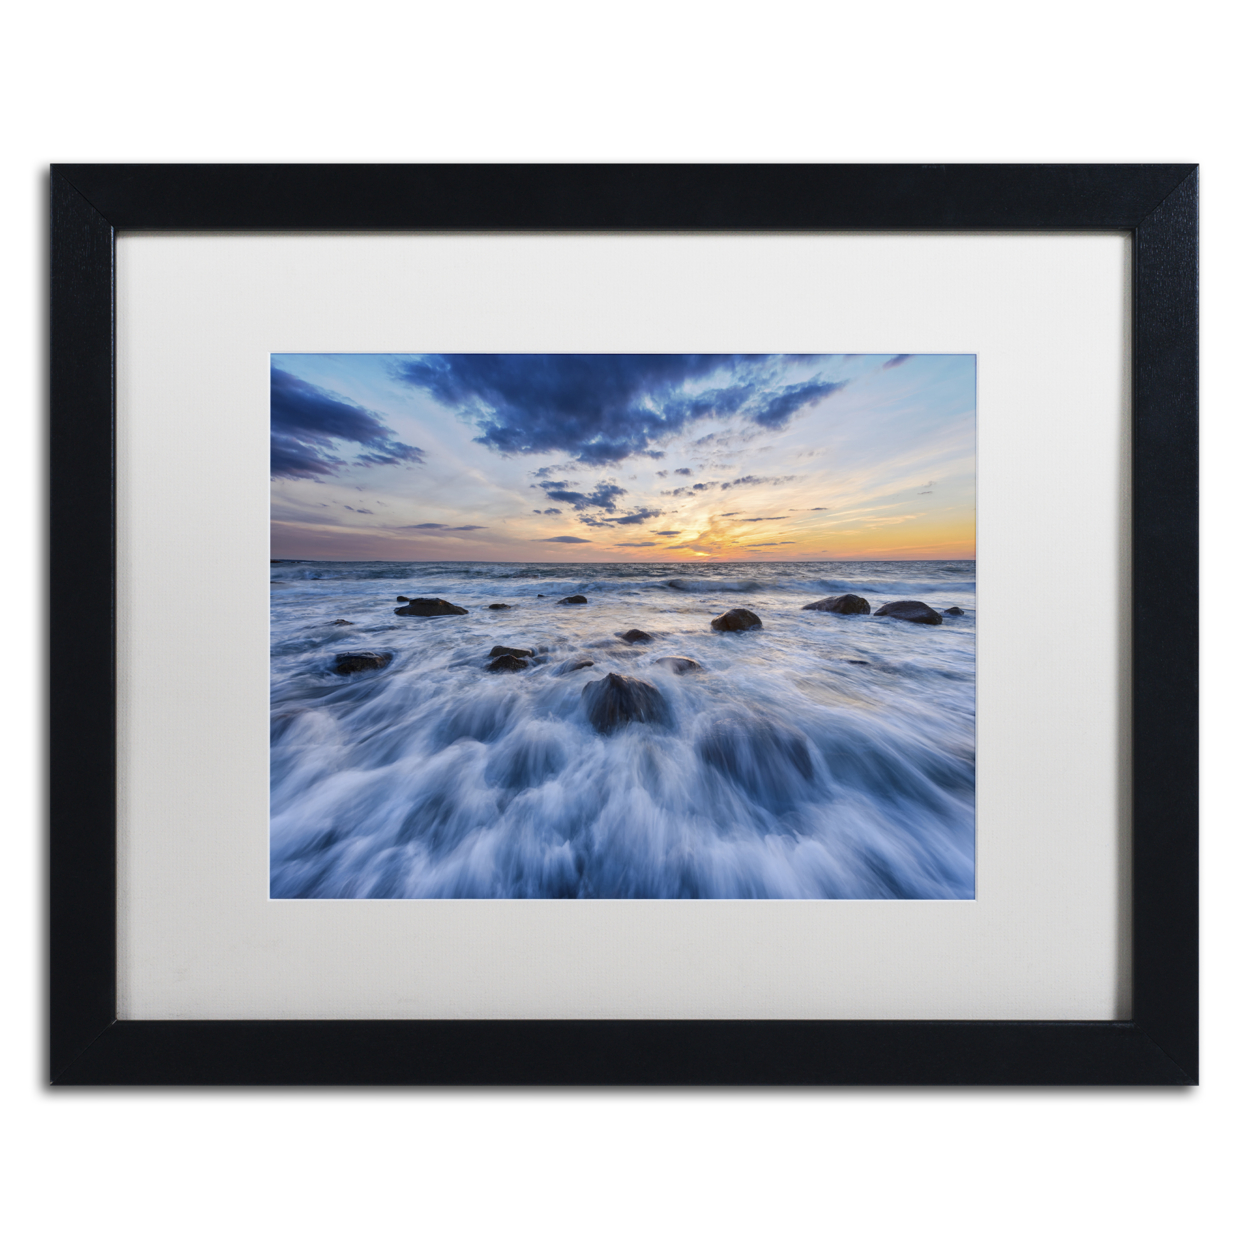 Michael Blanchette Photography 'Tidal Fury' Black Wooden Framed Art 18 X 22 Inches